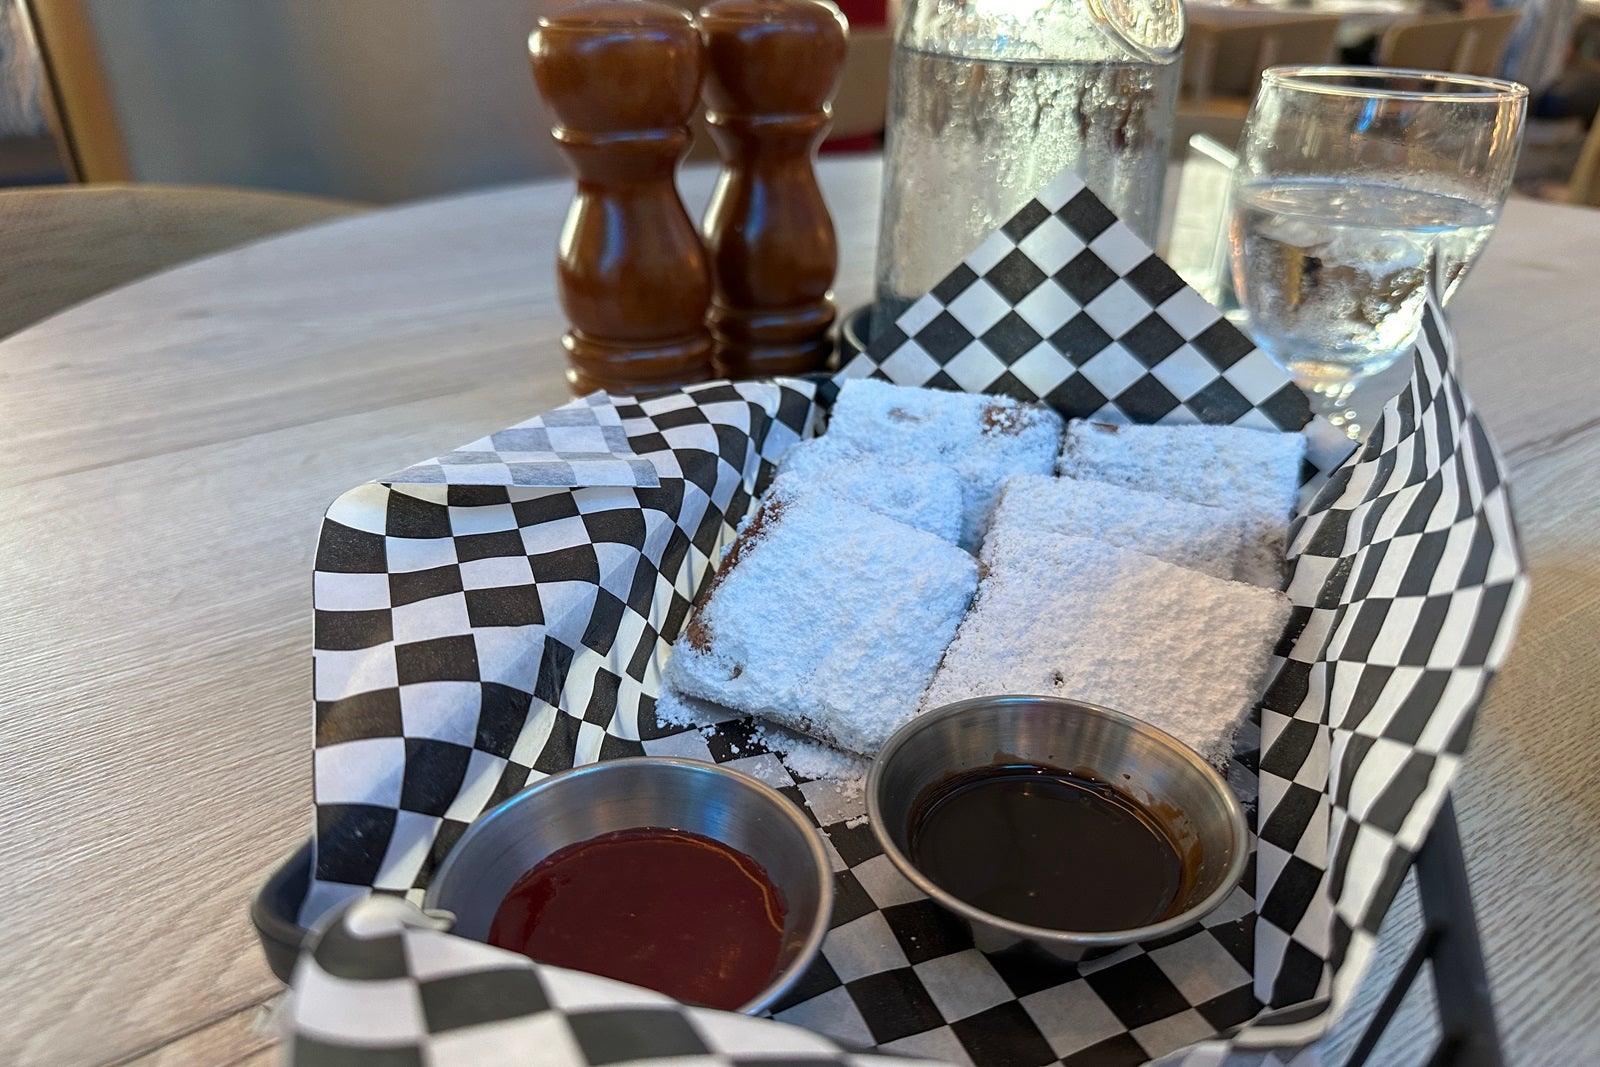 A basket of sugared beignets on black and white checkered paper